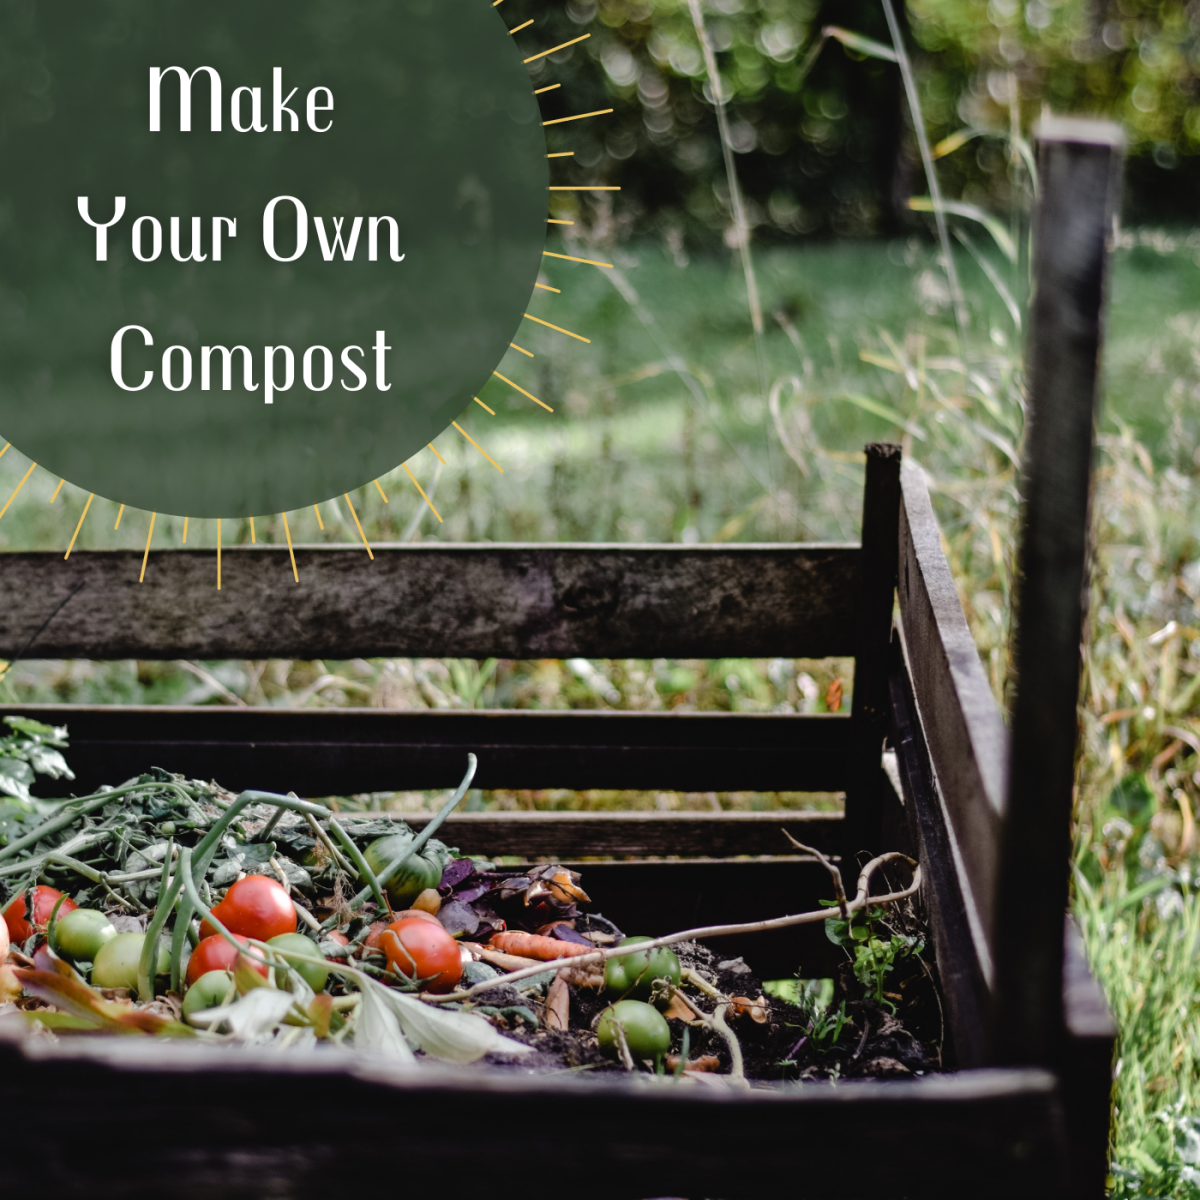 Making your own compost is easy and beneficial to your garden!